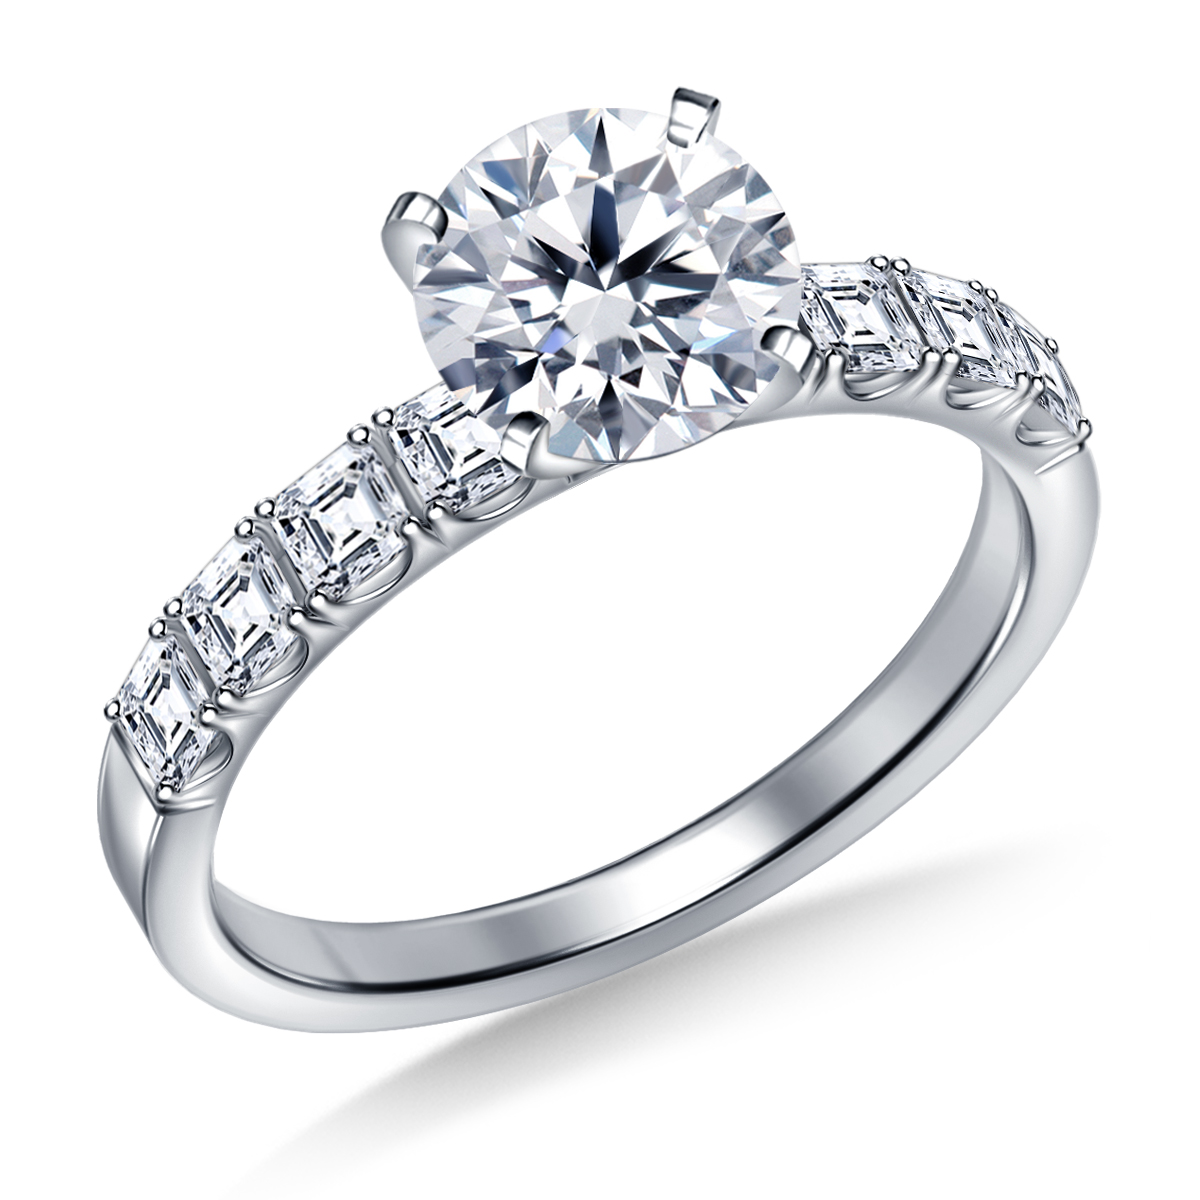 Diamond Engagement Ring with Asscher Cut Diamond Accents in 14K White Gold